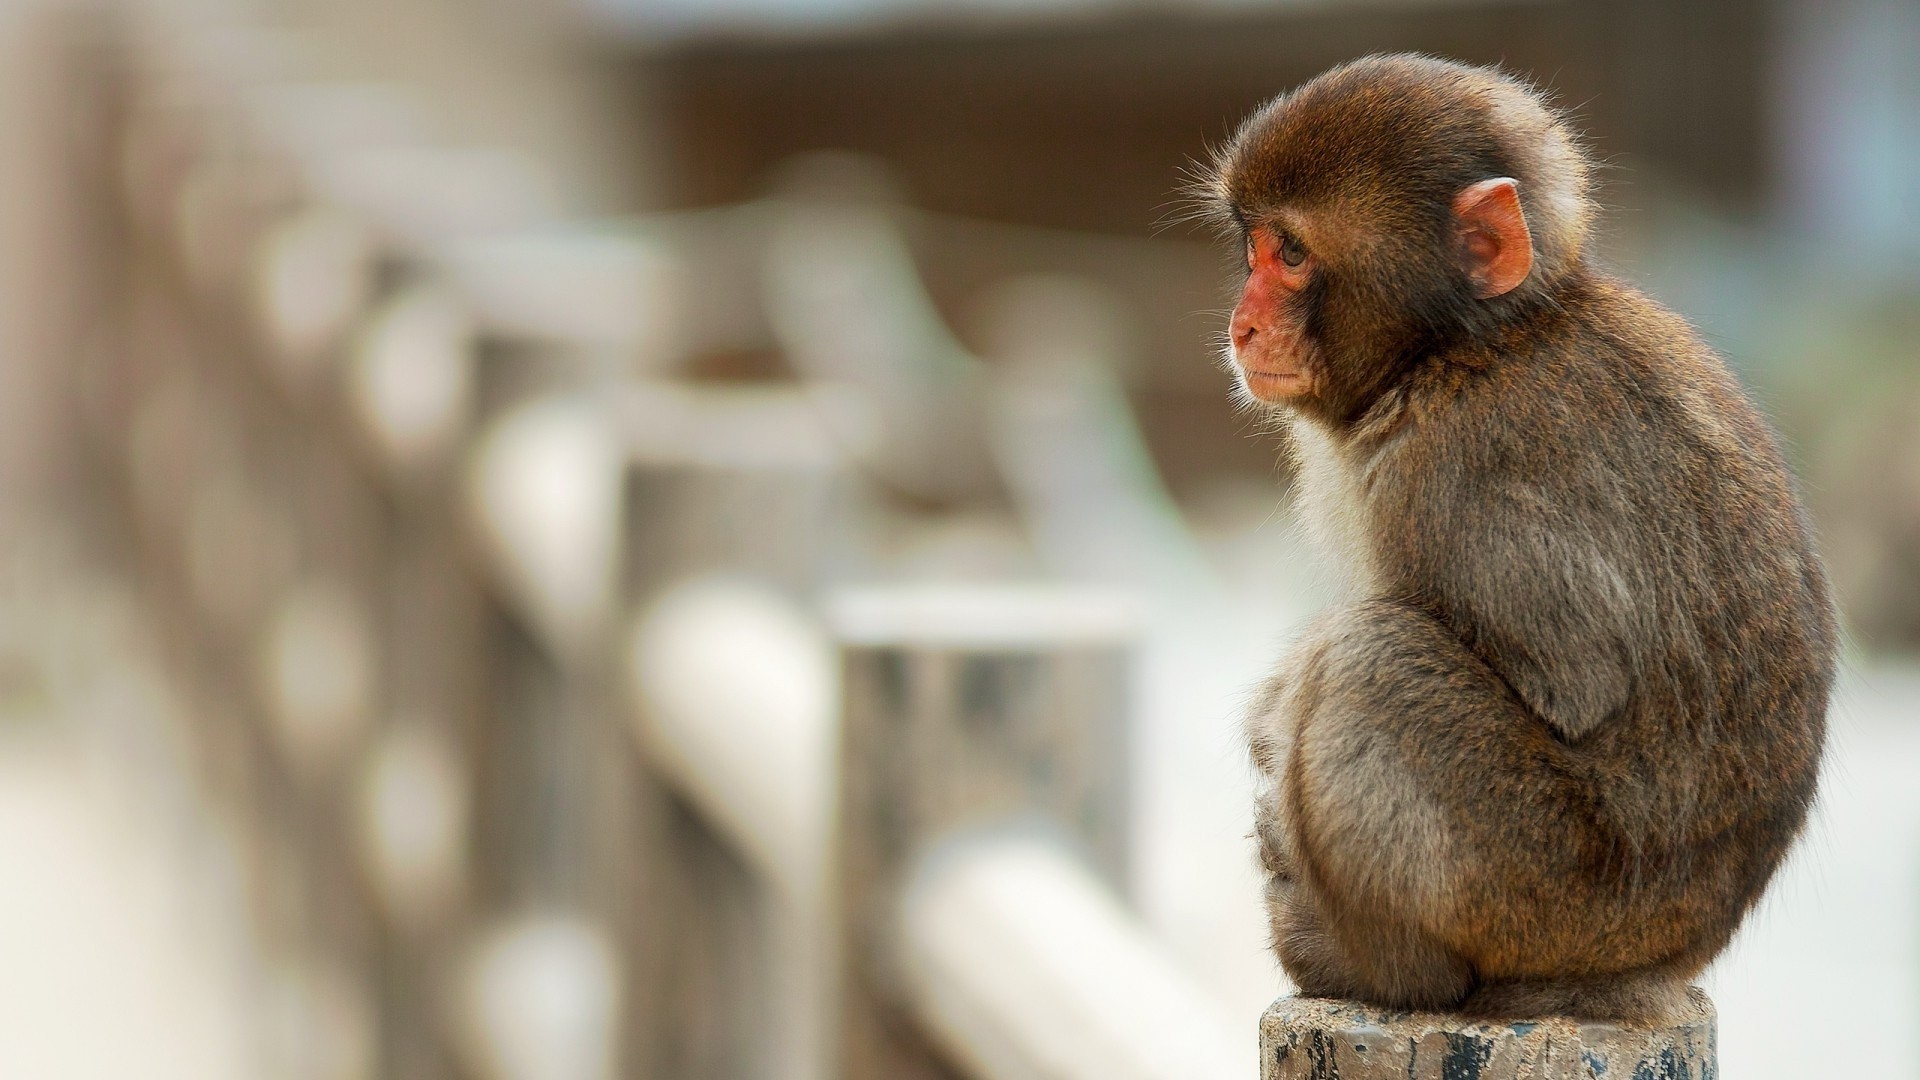 1920x1080 undefined Monkey Wallpaper (46 Wallpapers) | Adorable Wallpapers